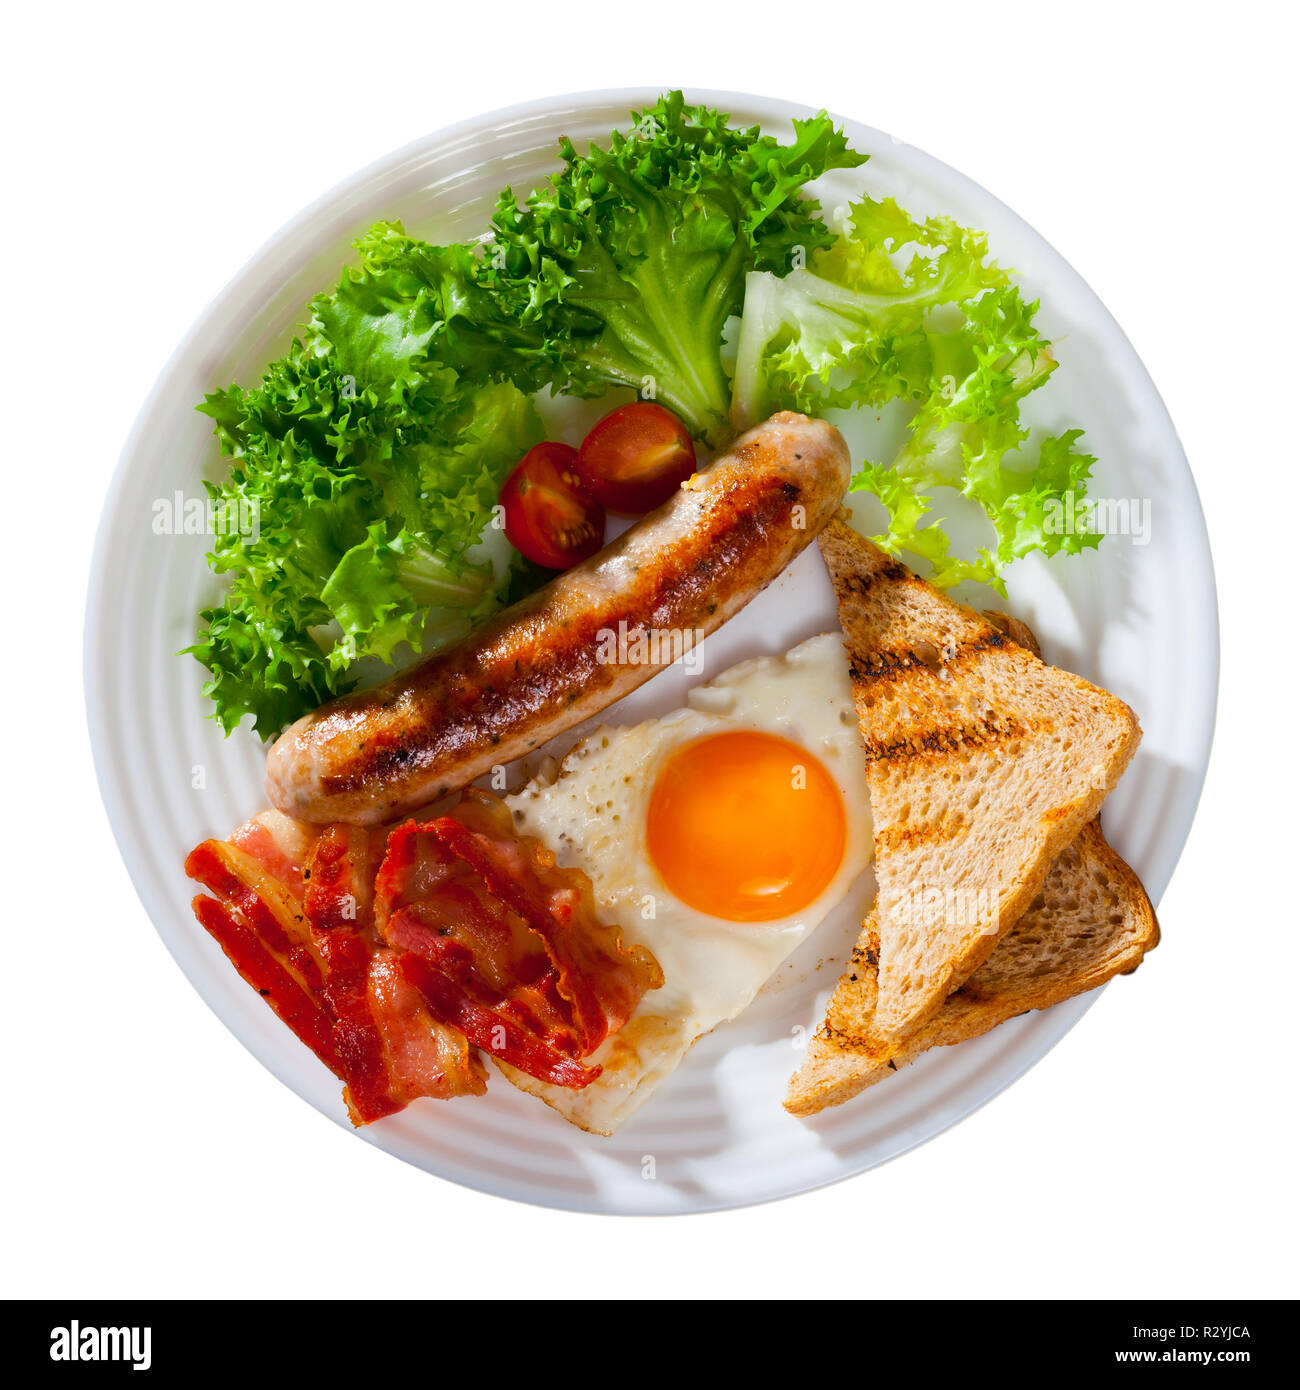 Top view of traditional American style breakfast - fried eggs with bacon, sausage and toasts garnished with fresh greens on white plate. Isolated over Stock Photo